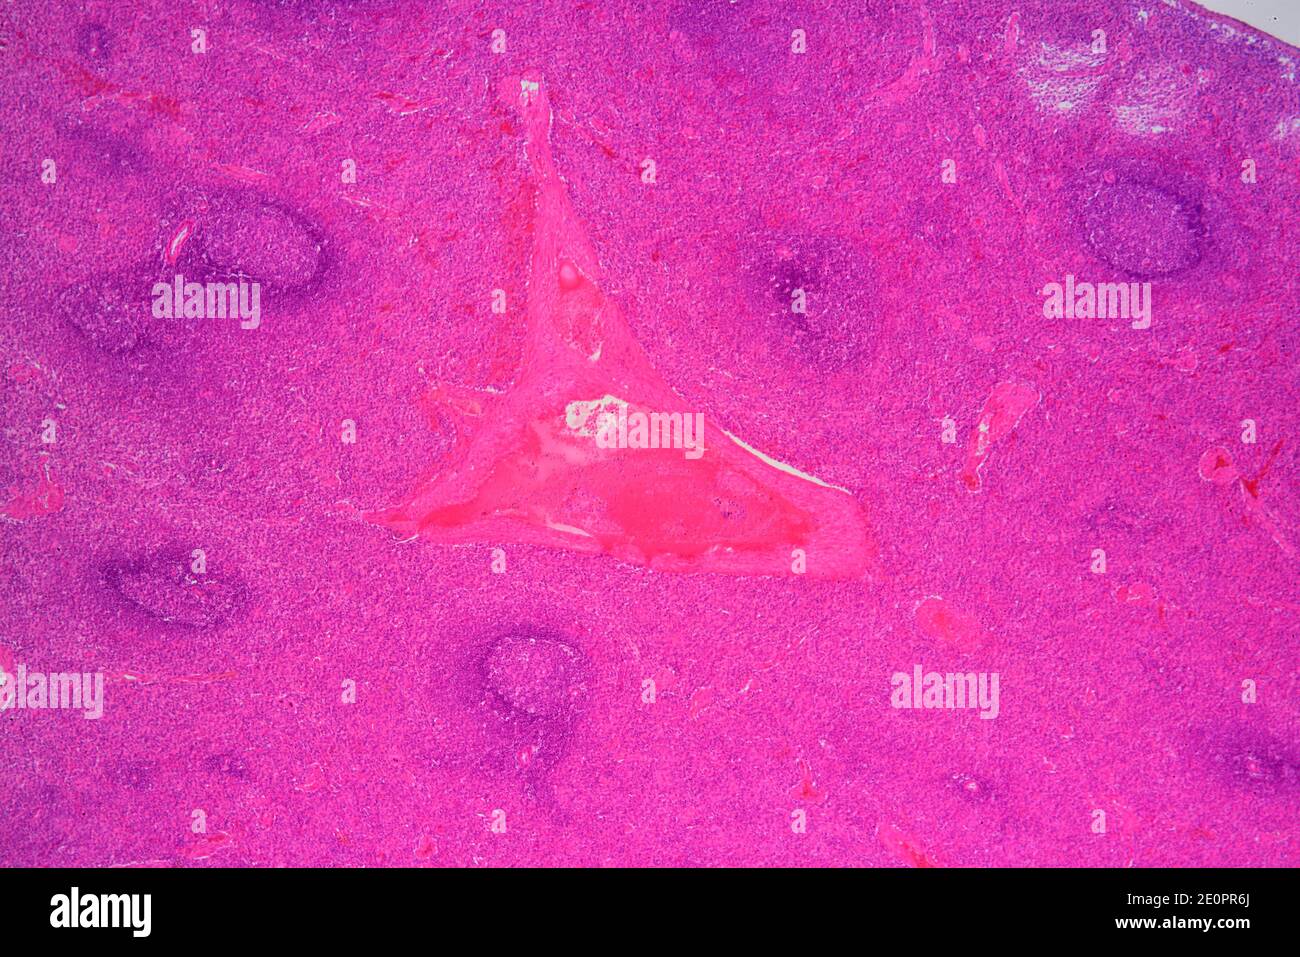 Human spleen (lymphatic organ) showing capsules, red pulp, white pulp and blood vessel. X25 at 10 cm wide. Stock Photo